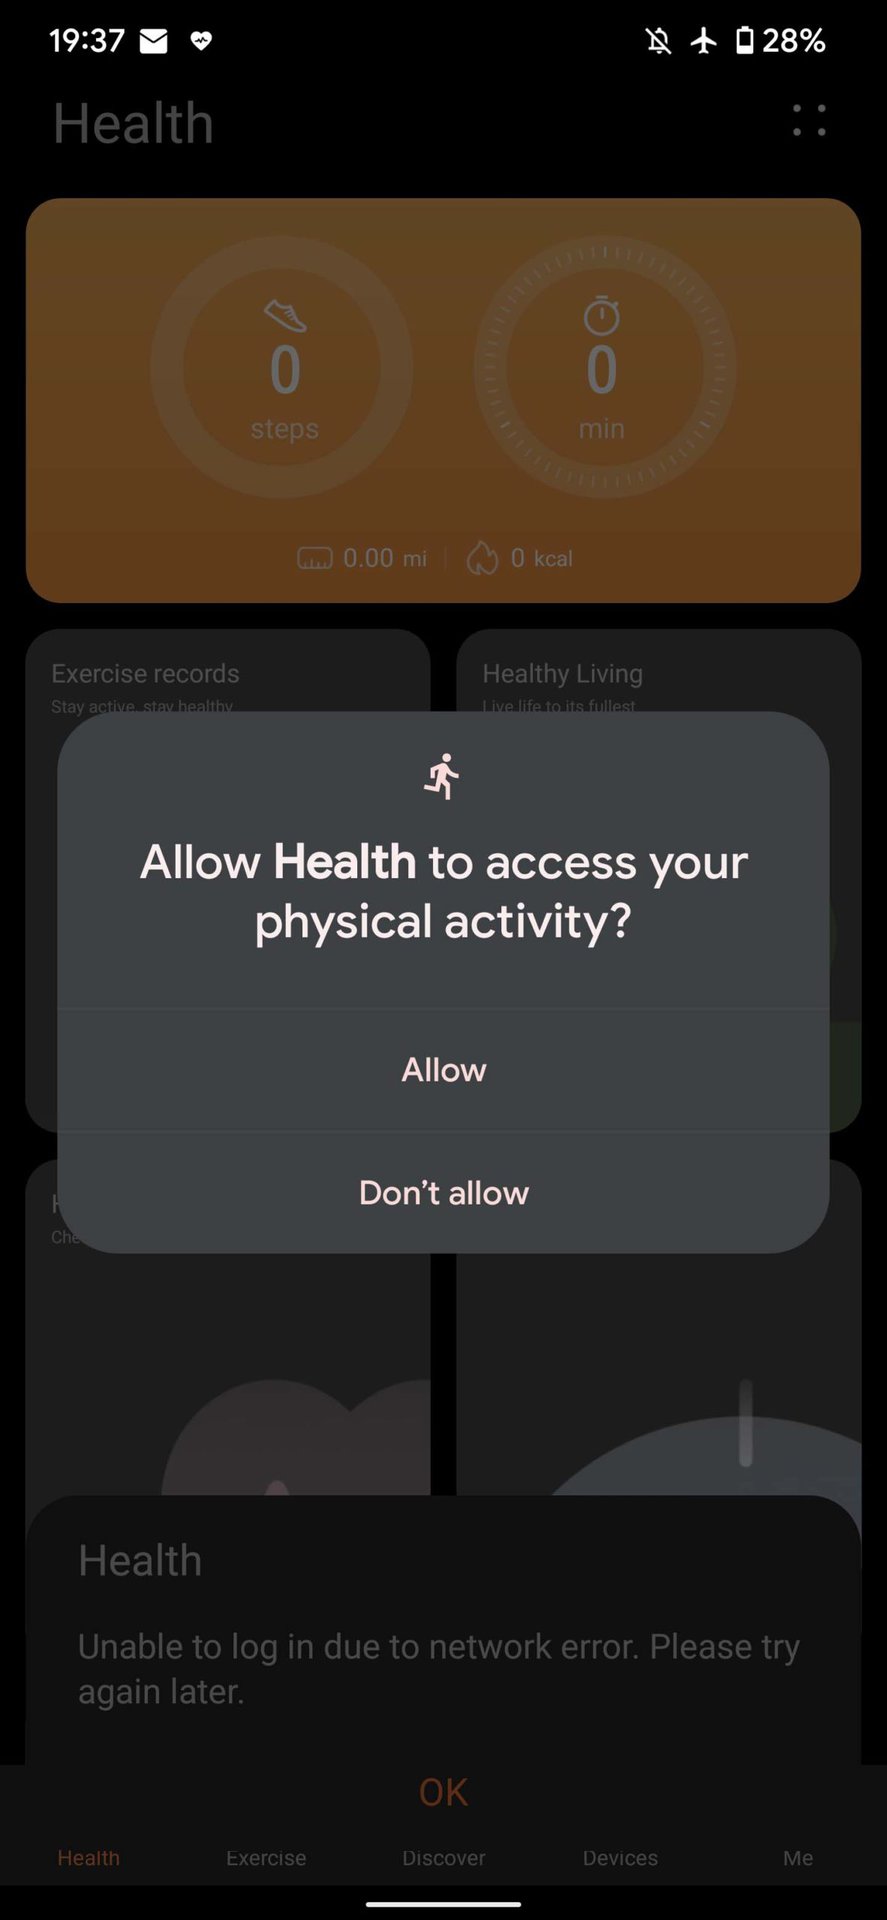 HUAWEI Health dashboard and access prompt